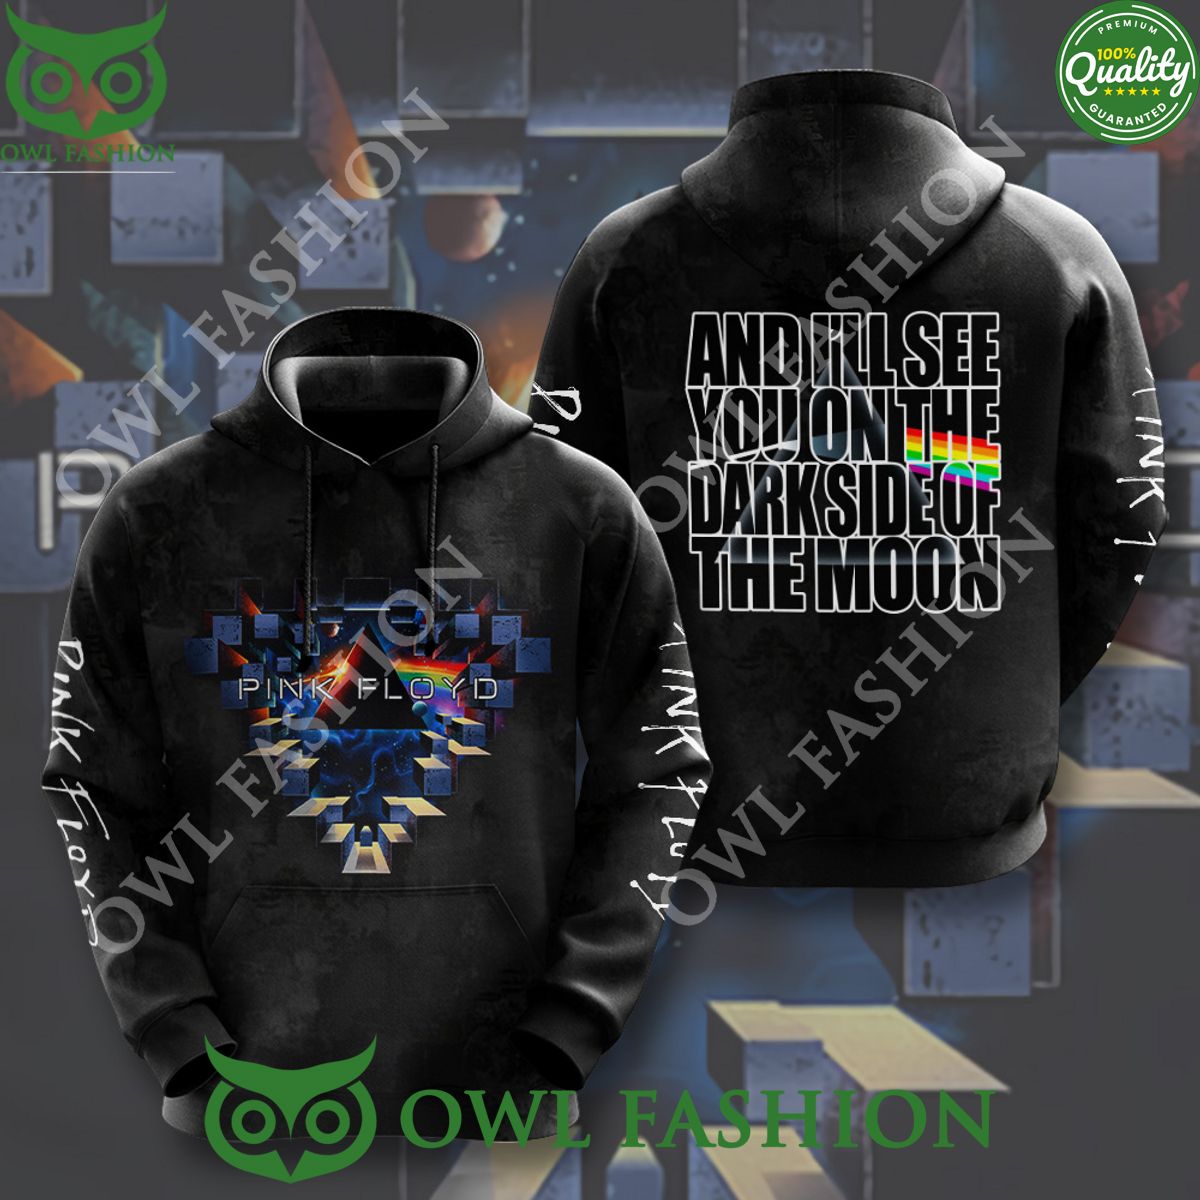 pink floyd and ill see you on the dark side of the moon 3d shirt 2 6ZNsr.jpg